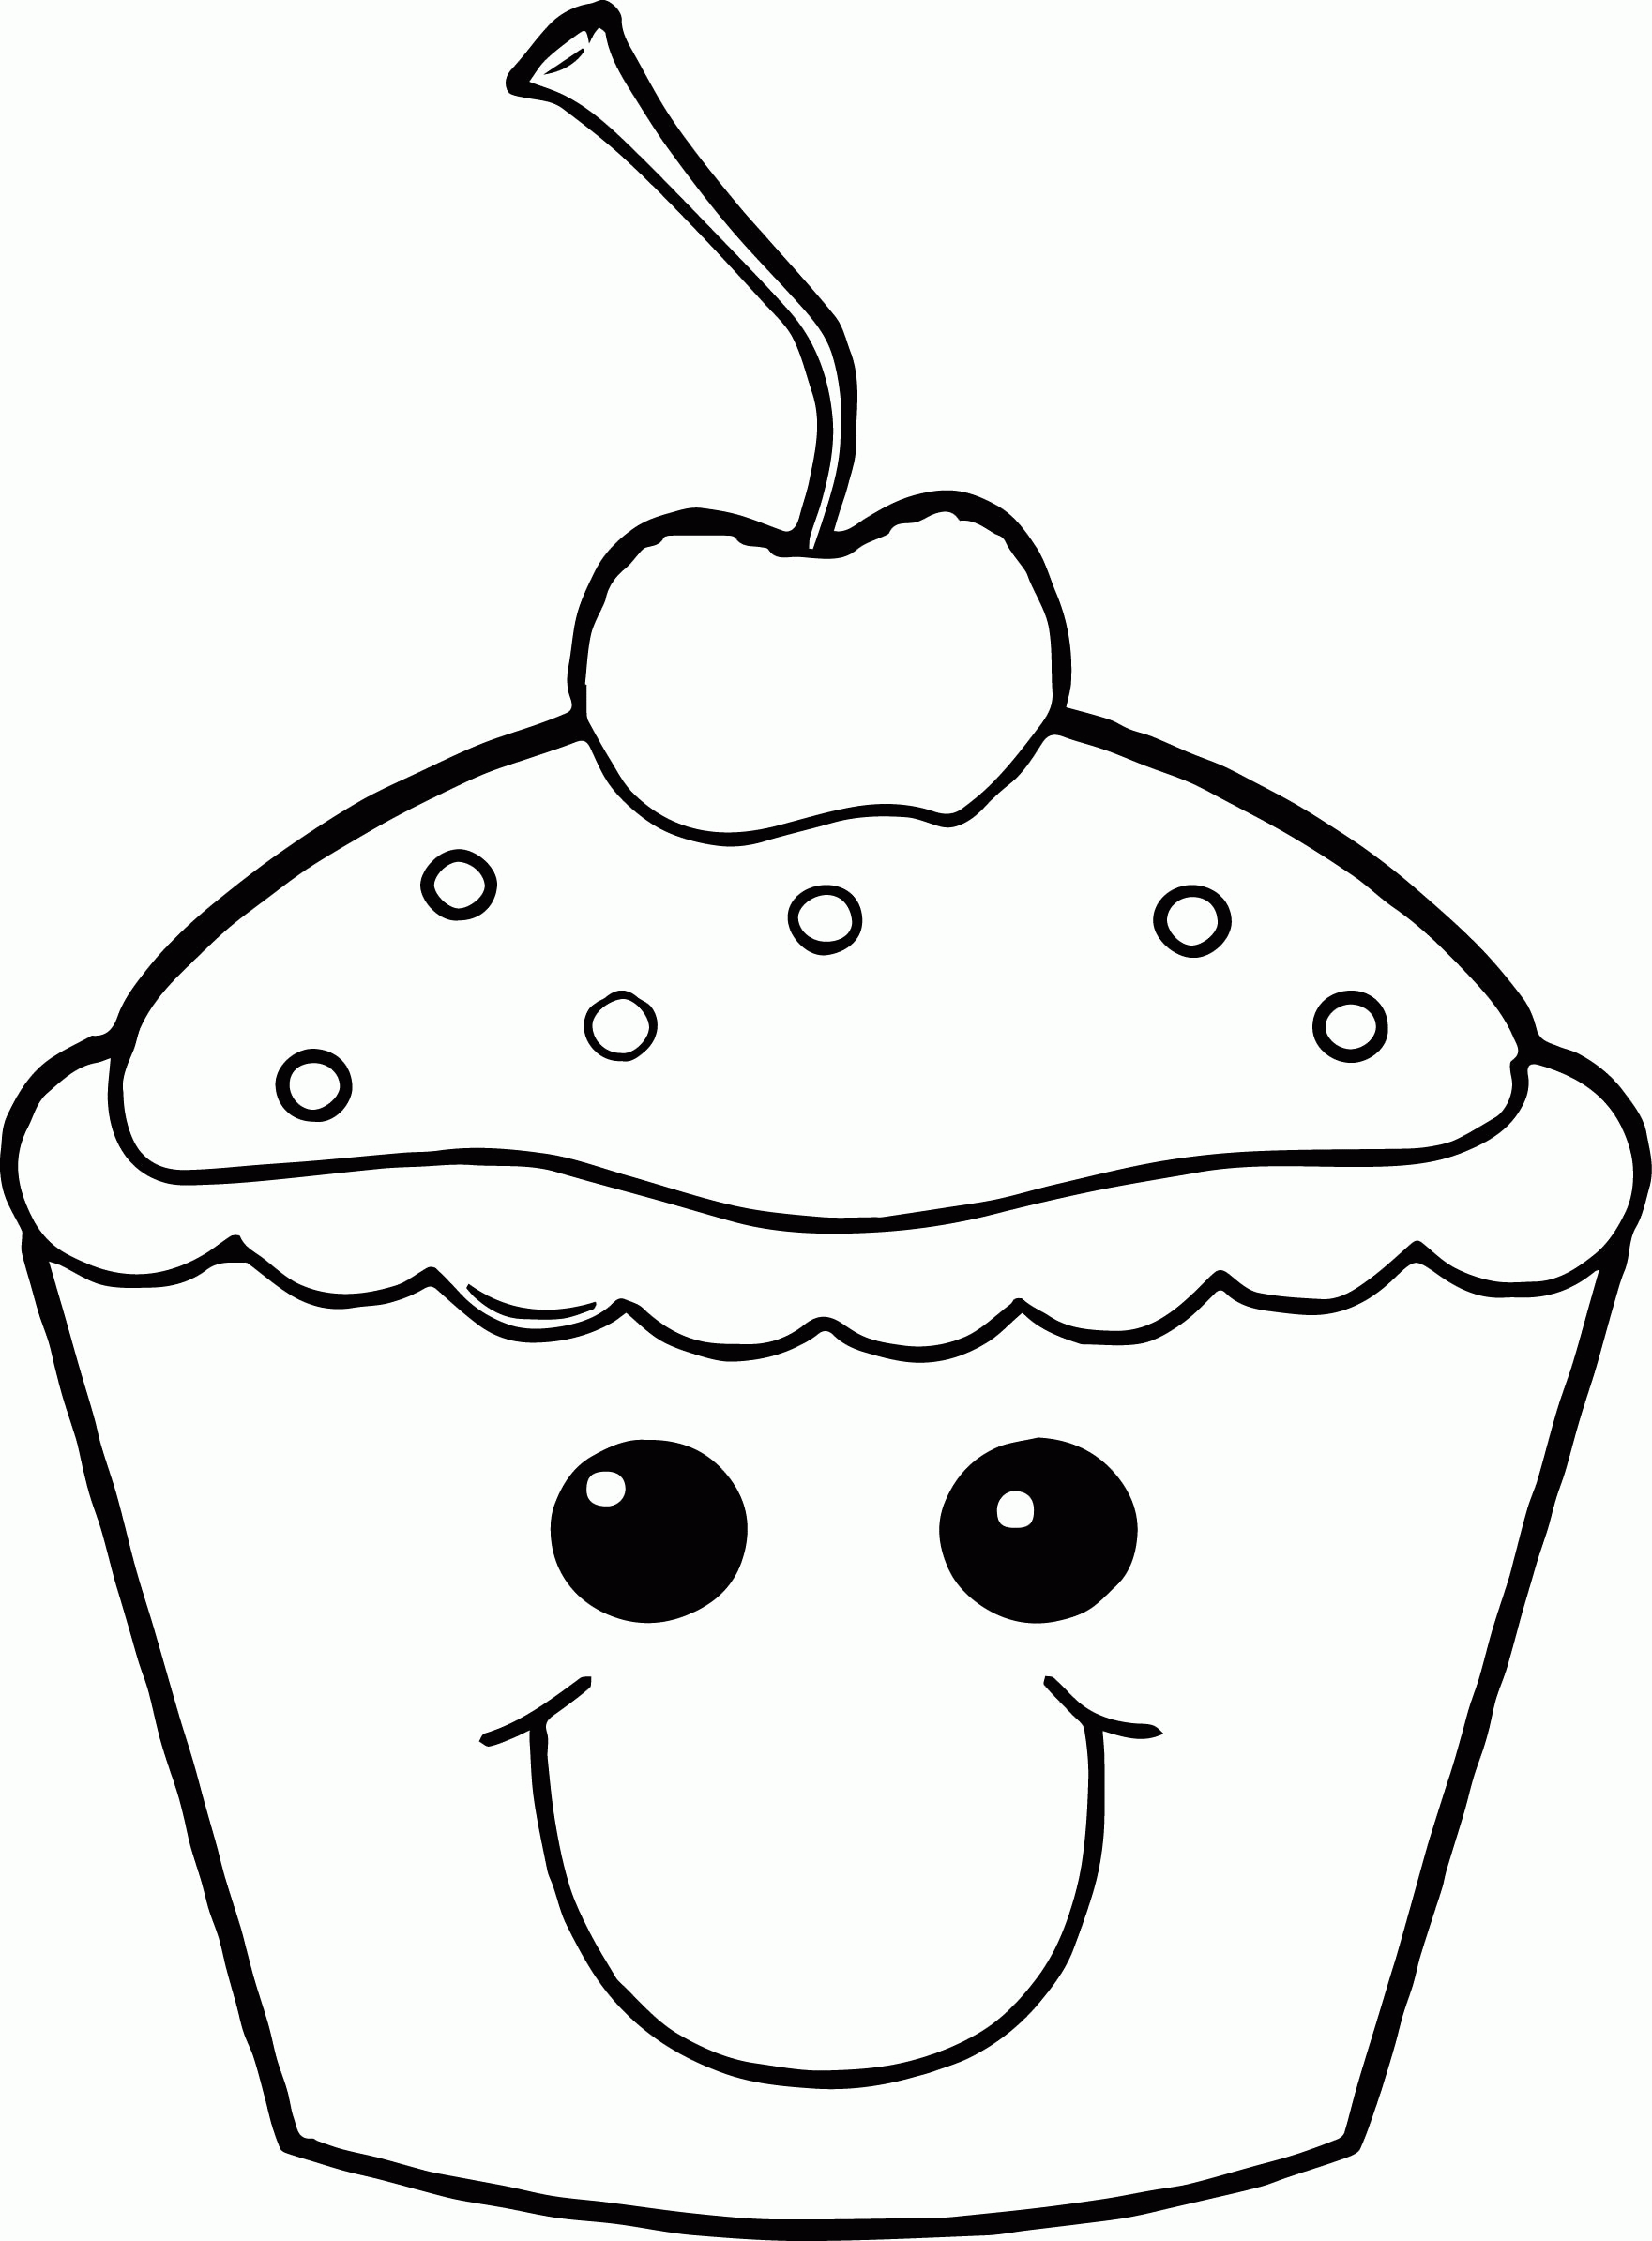 811 Unicorn Free Cupcake Coloring Pages 